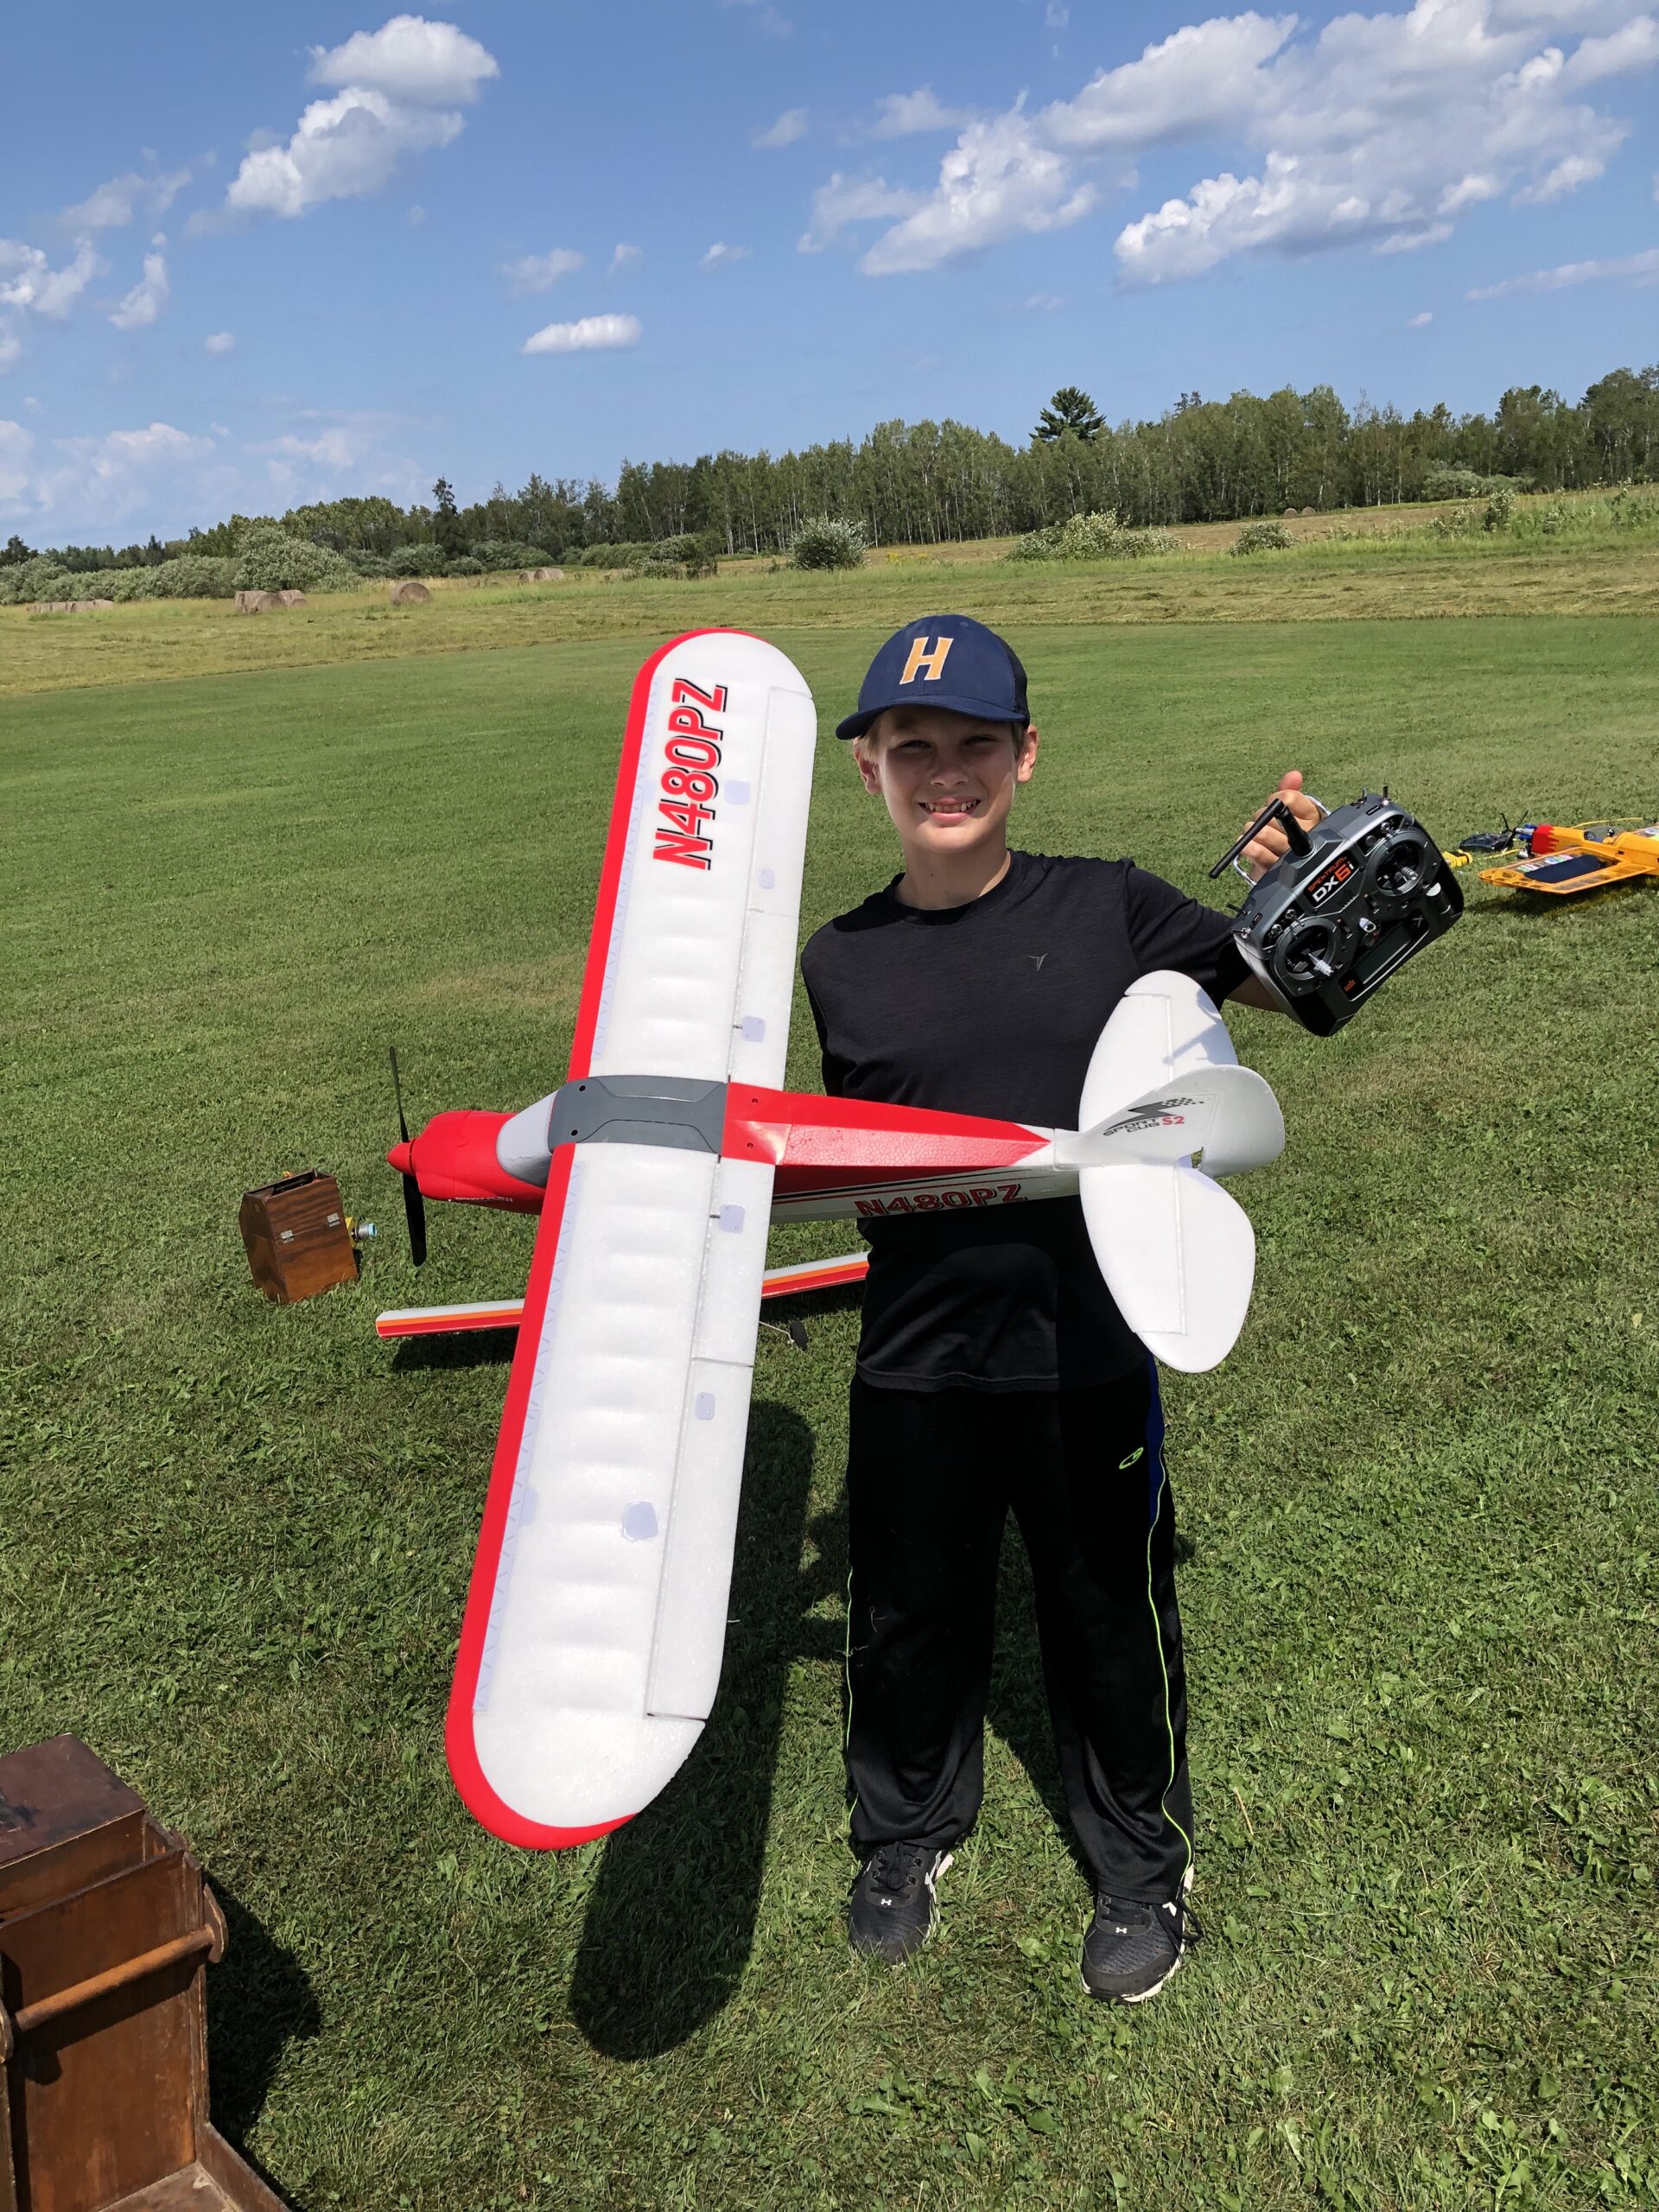 Youth in r/c aircraft flying